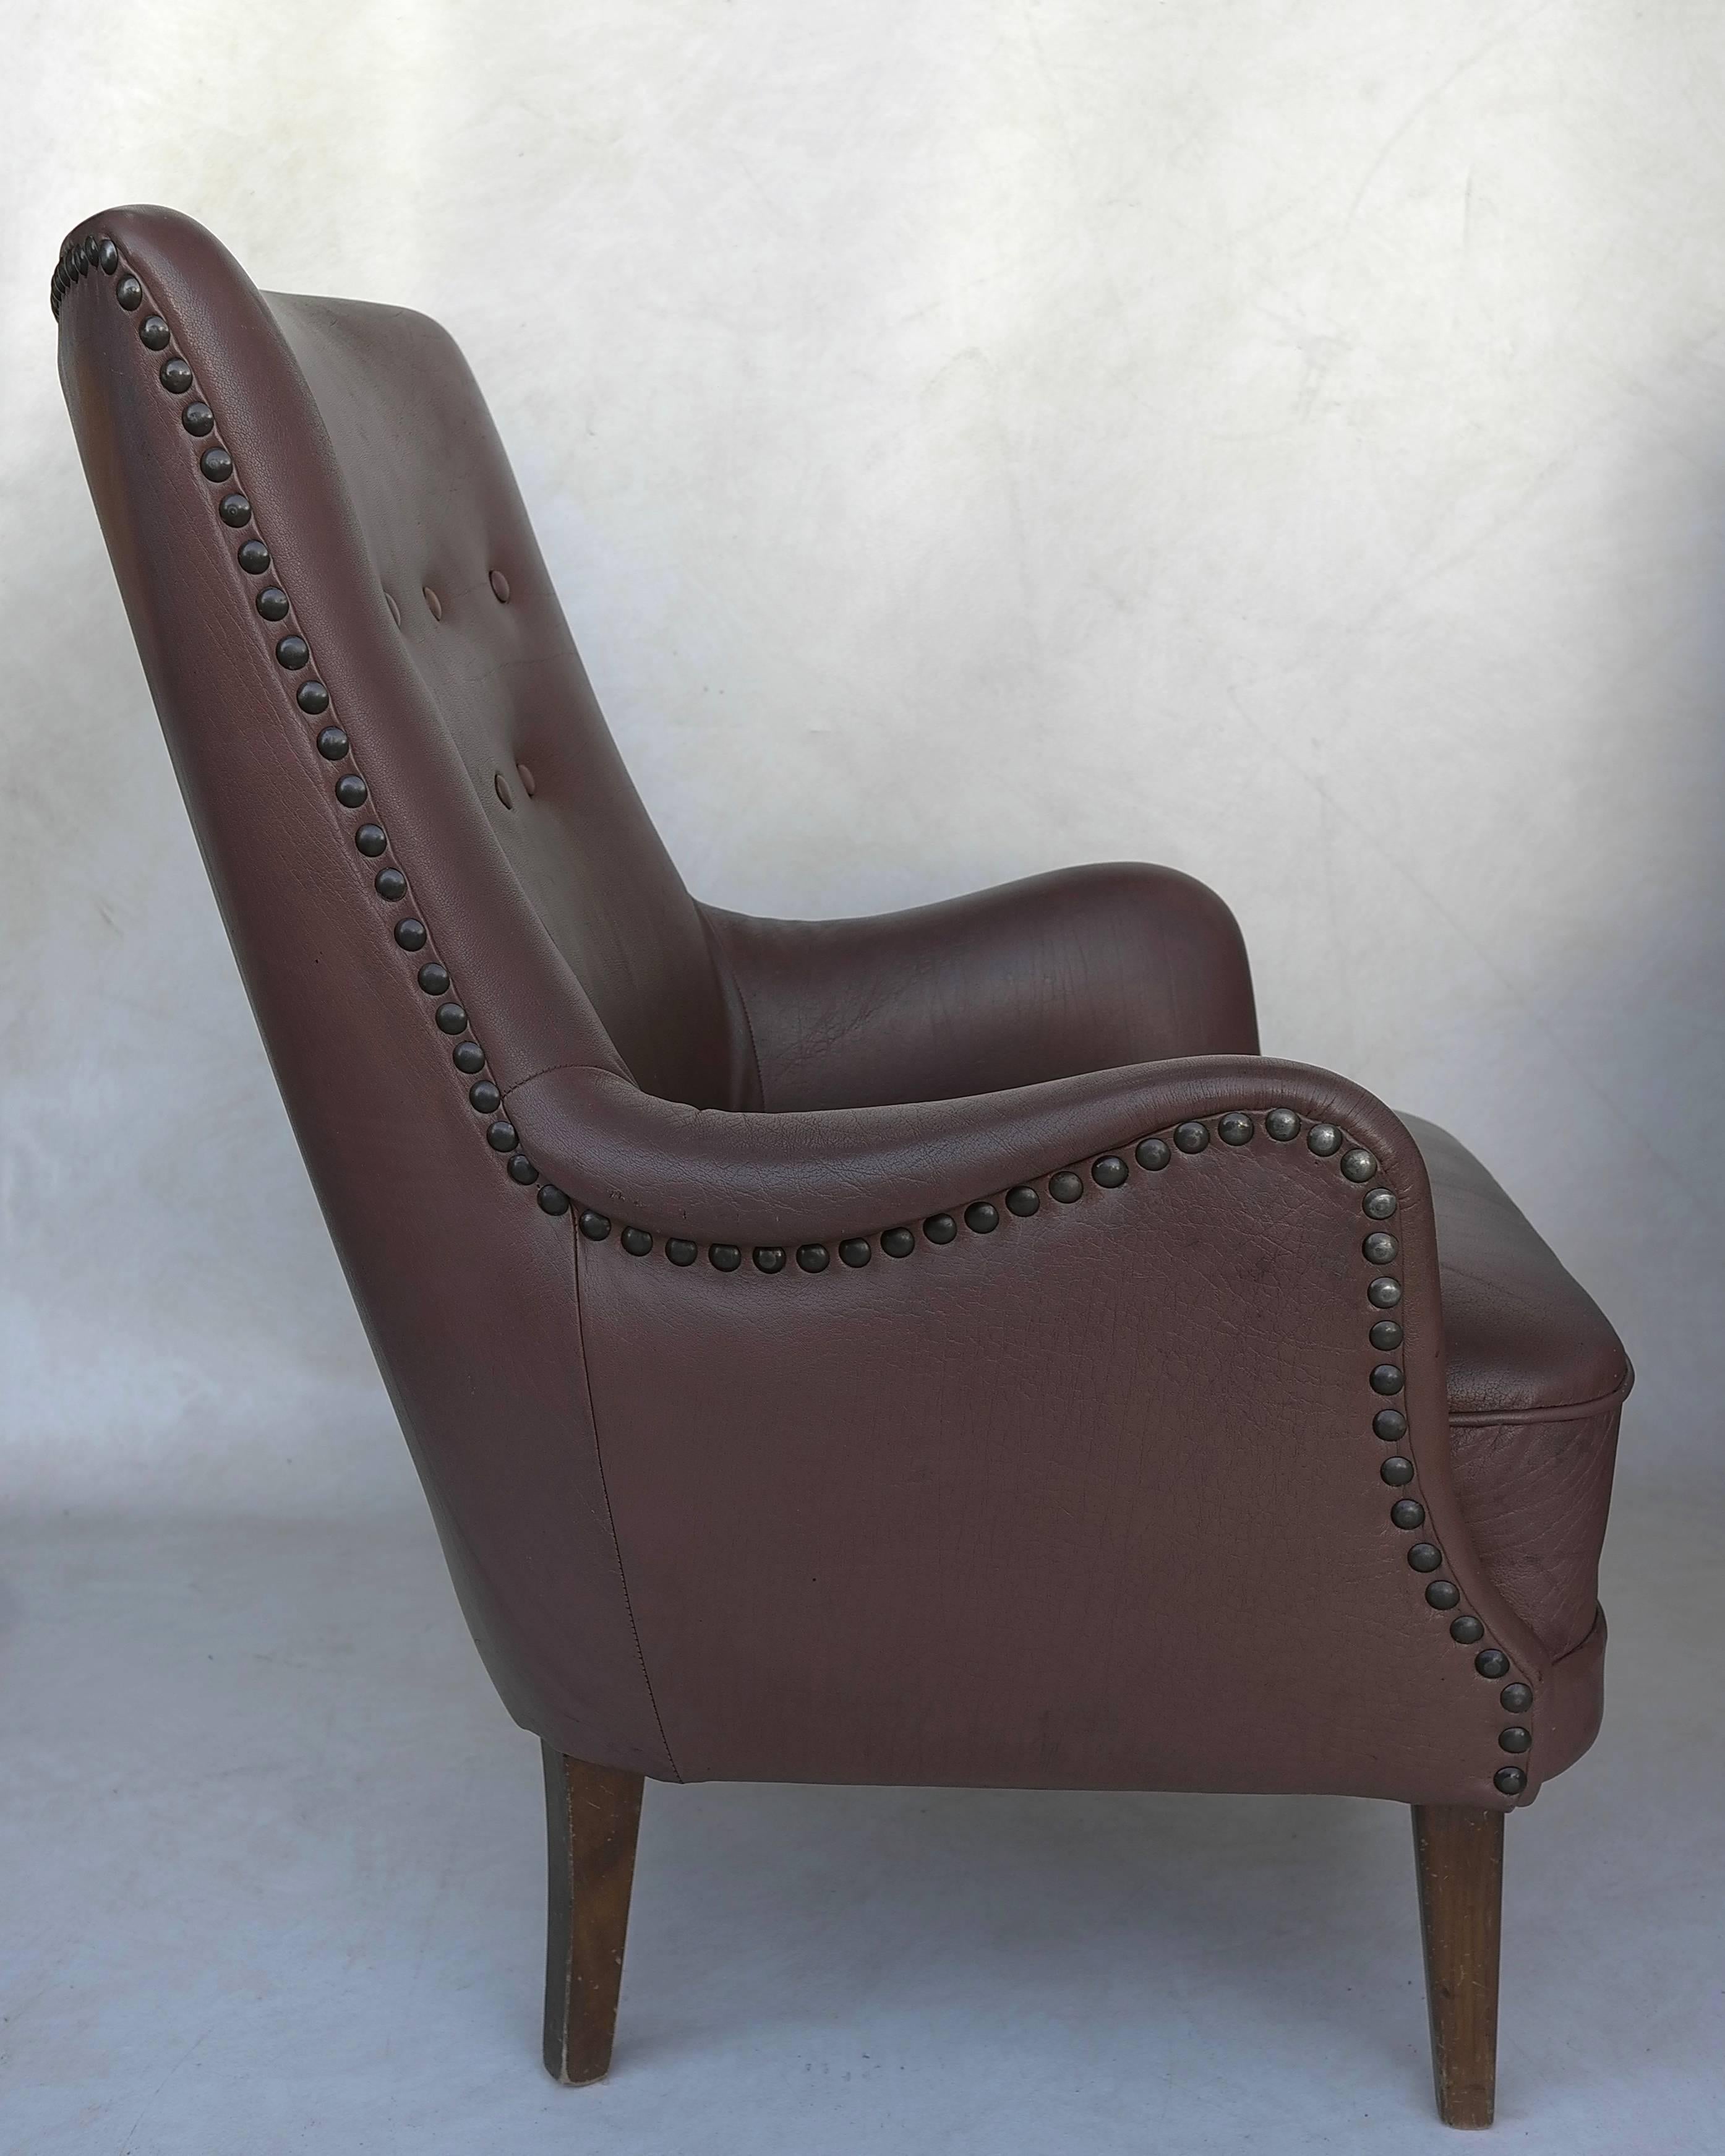 Pair of Danish High Back Armchairs in Brown Leather in style of Arne Vodder 1